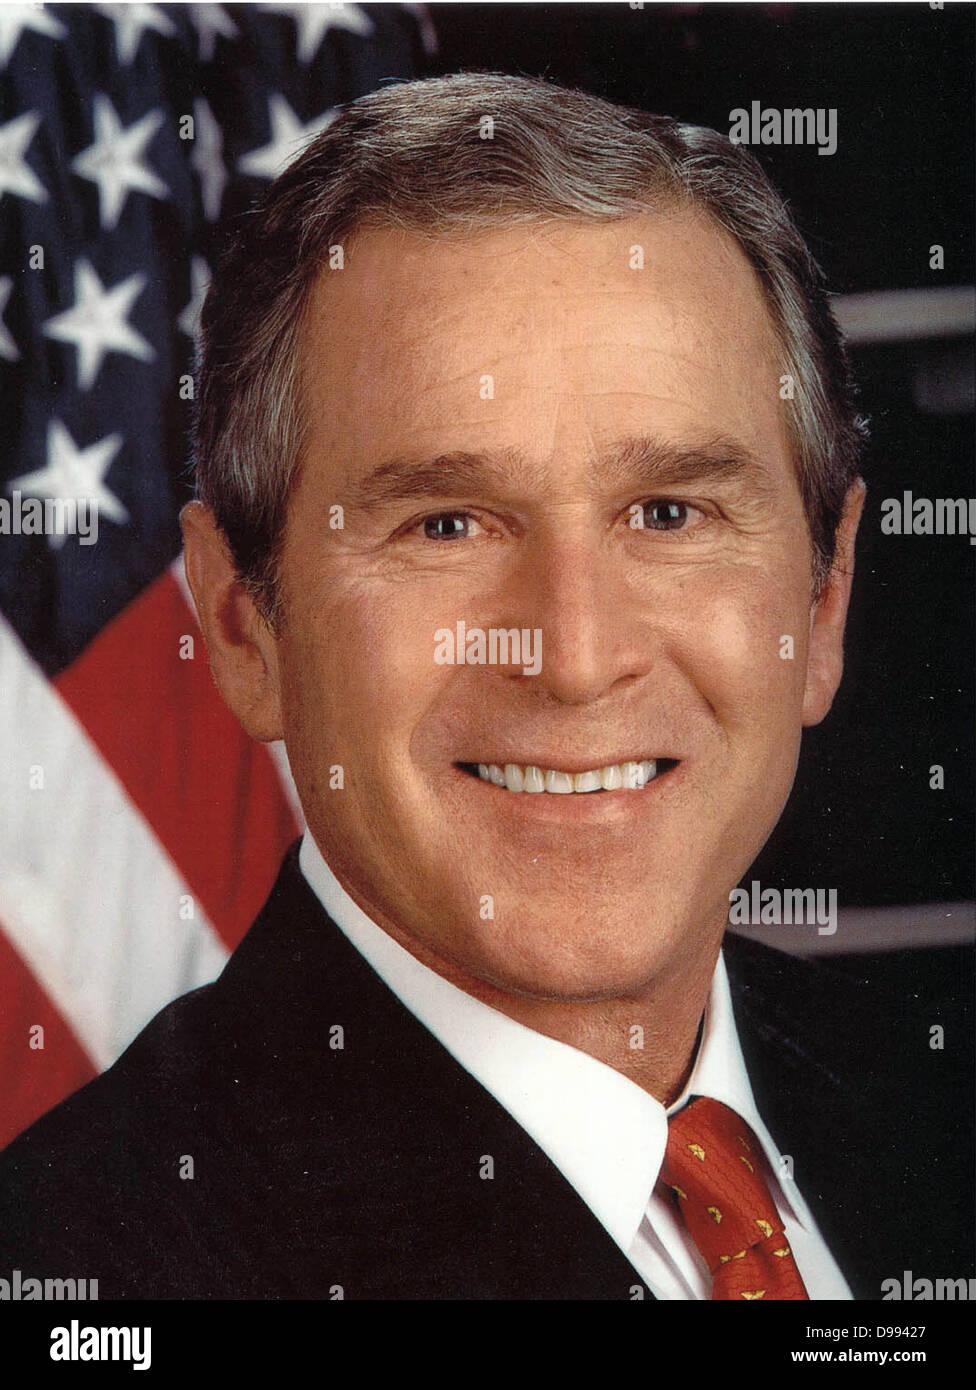 George Walker Bush (born 1946) 43rd President of the United States 2001-2009. 46th Governor of Texas 1995-2000. Head-and-shoulders portrait with stars-and-stripes in background. American Politician Republican Stock Photo